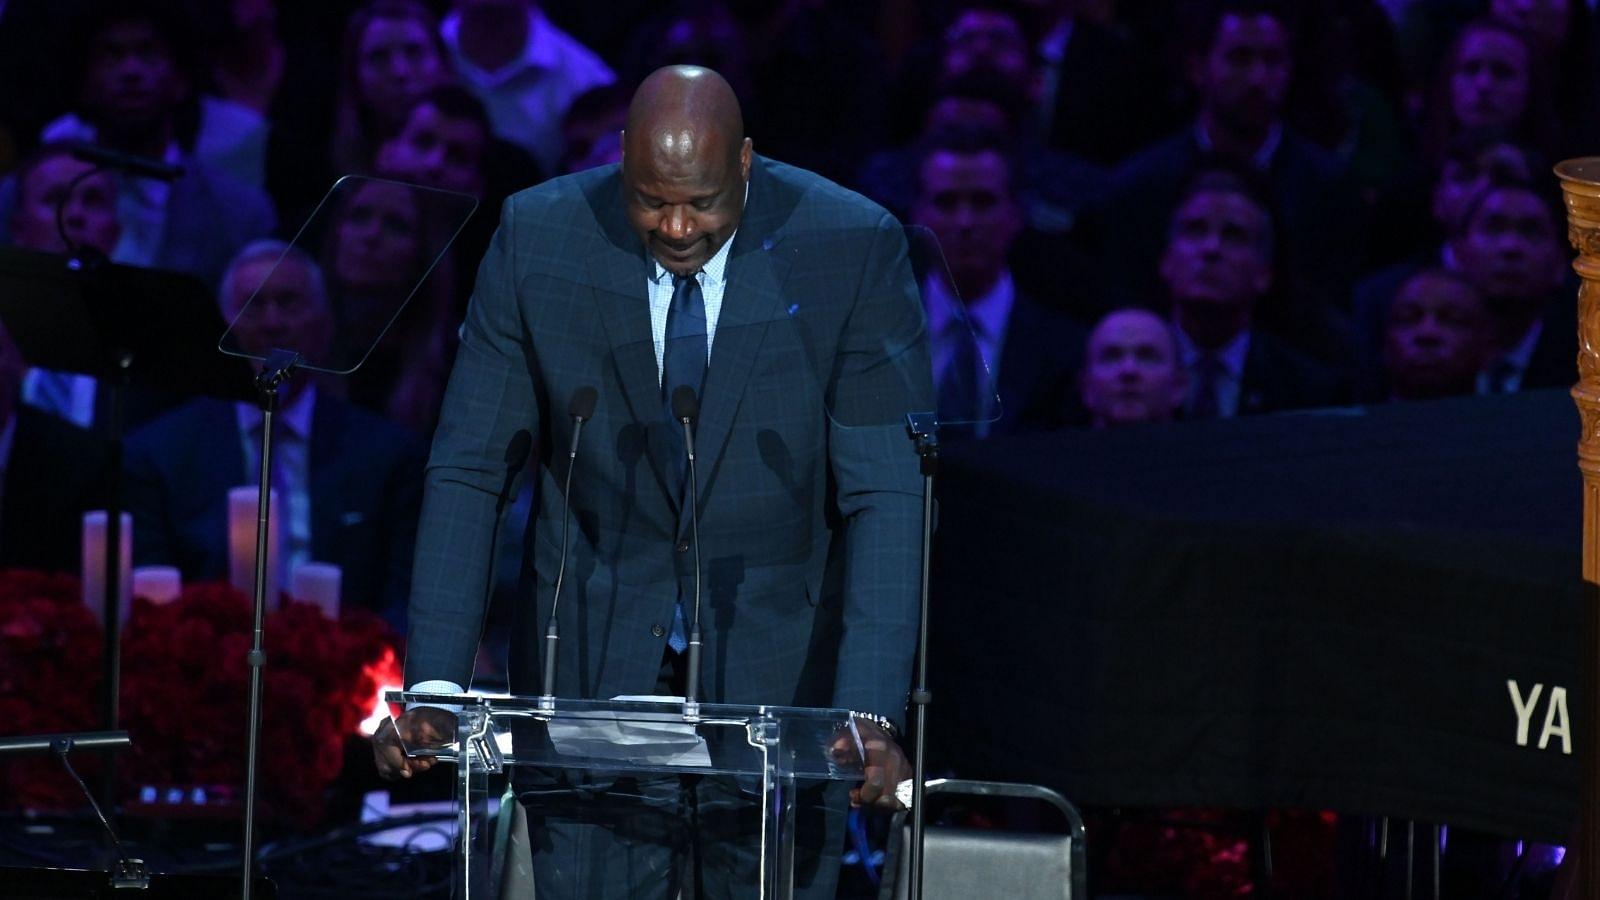 "I don't like to use the D word but I was lost in that 76,000 sq-foot Mansion": Shaquille O’Neal describes dealing with depression after divorce with Shaunie Nelson